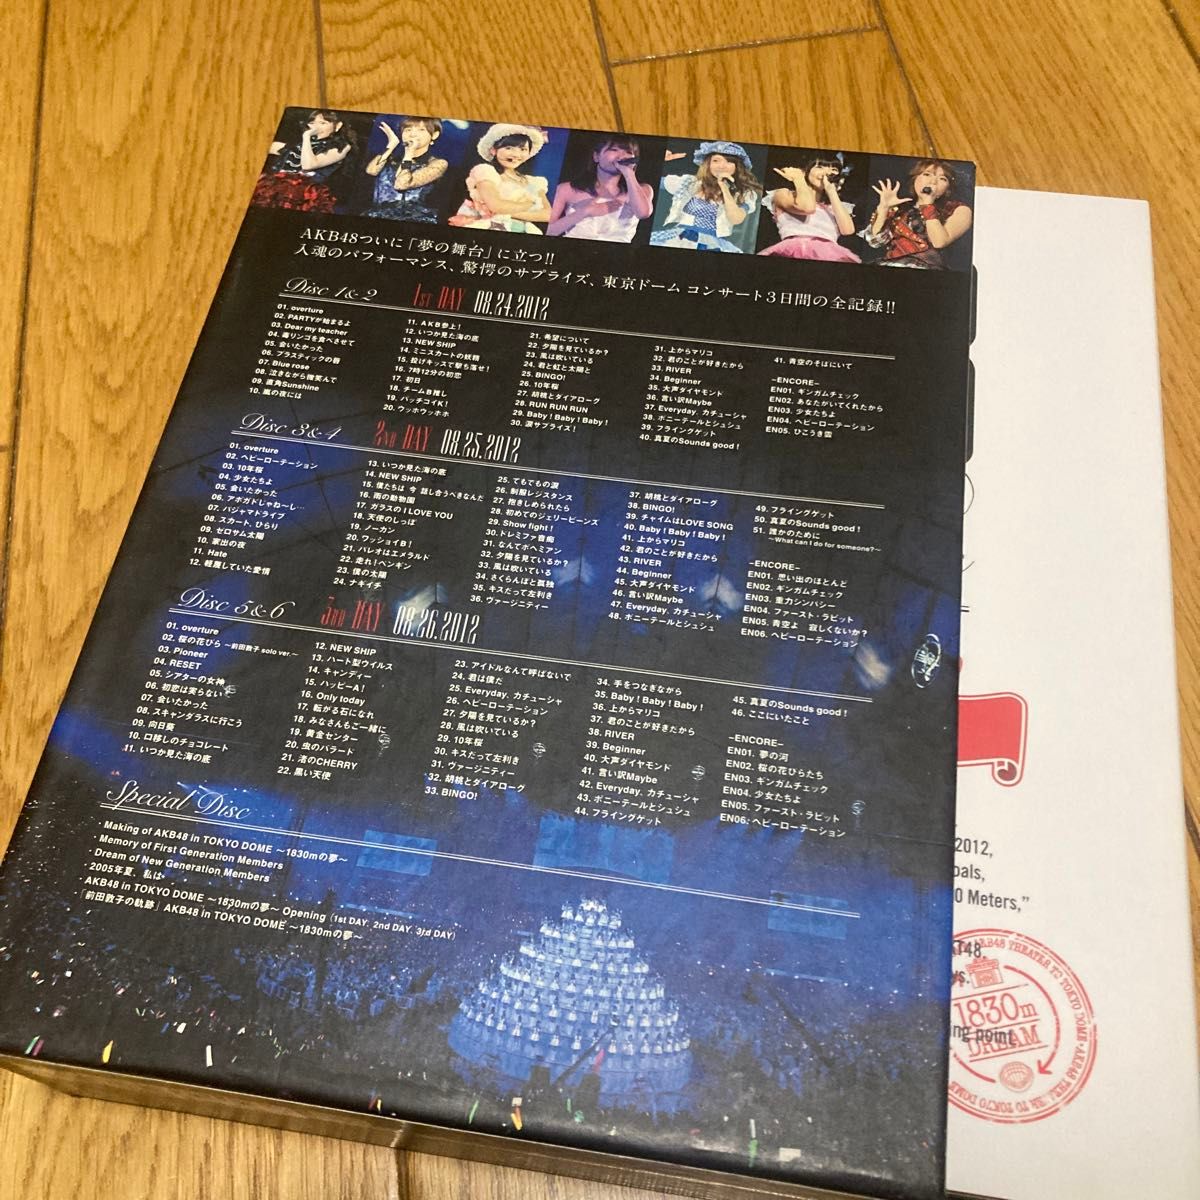 AKB48/AKB48 in TOKYO DOME～1830mの夢 DVD